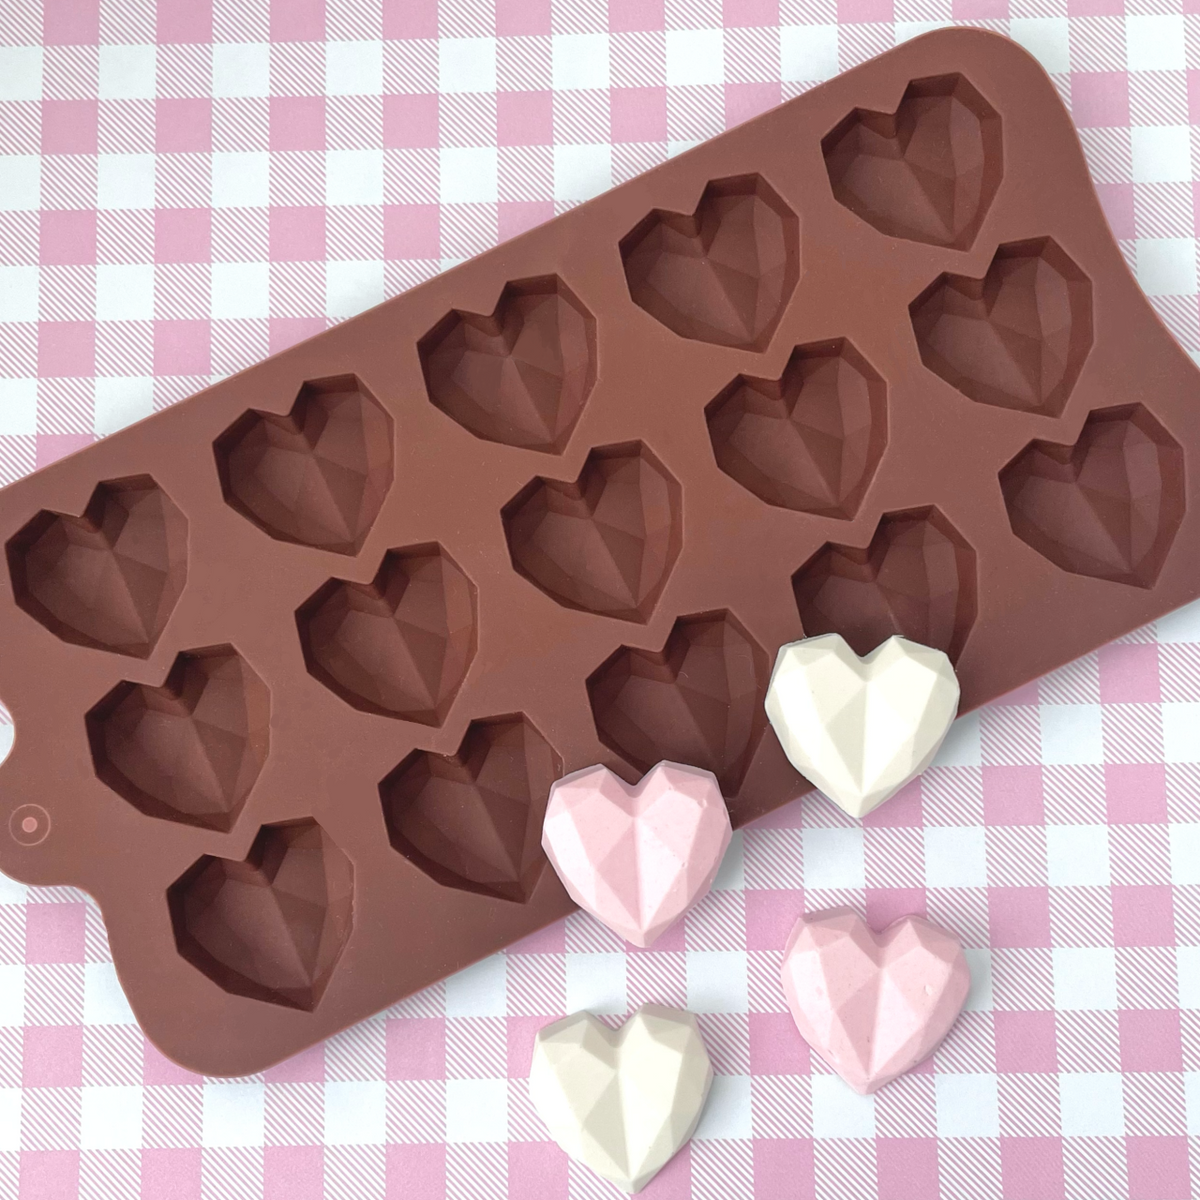  Palksky Breakable Heart Mold Silicone with 1 Hammer, Large Chocolate  Molds for Cake Baking, Mother's Day Gift Candy Making Supplies : Home &  Kitchen